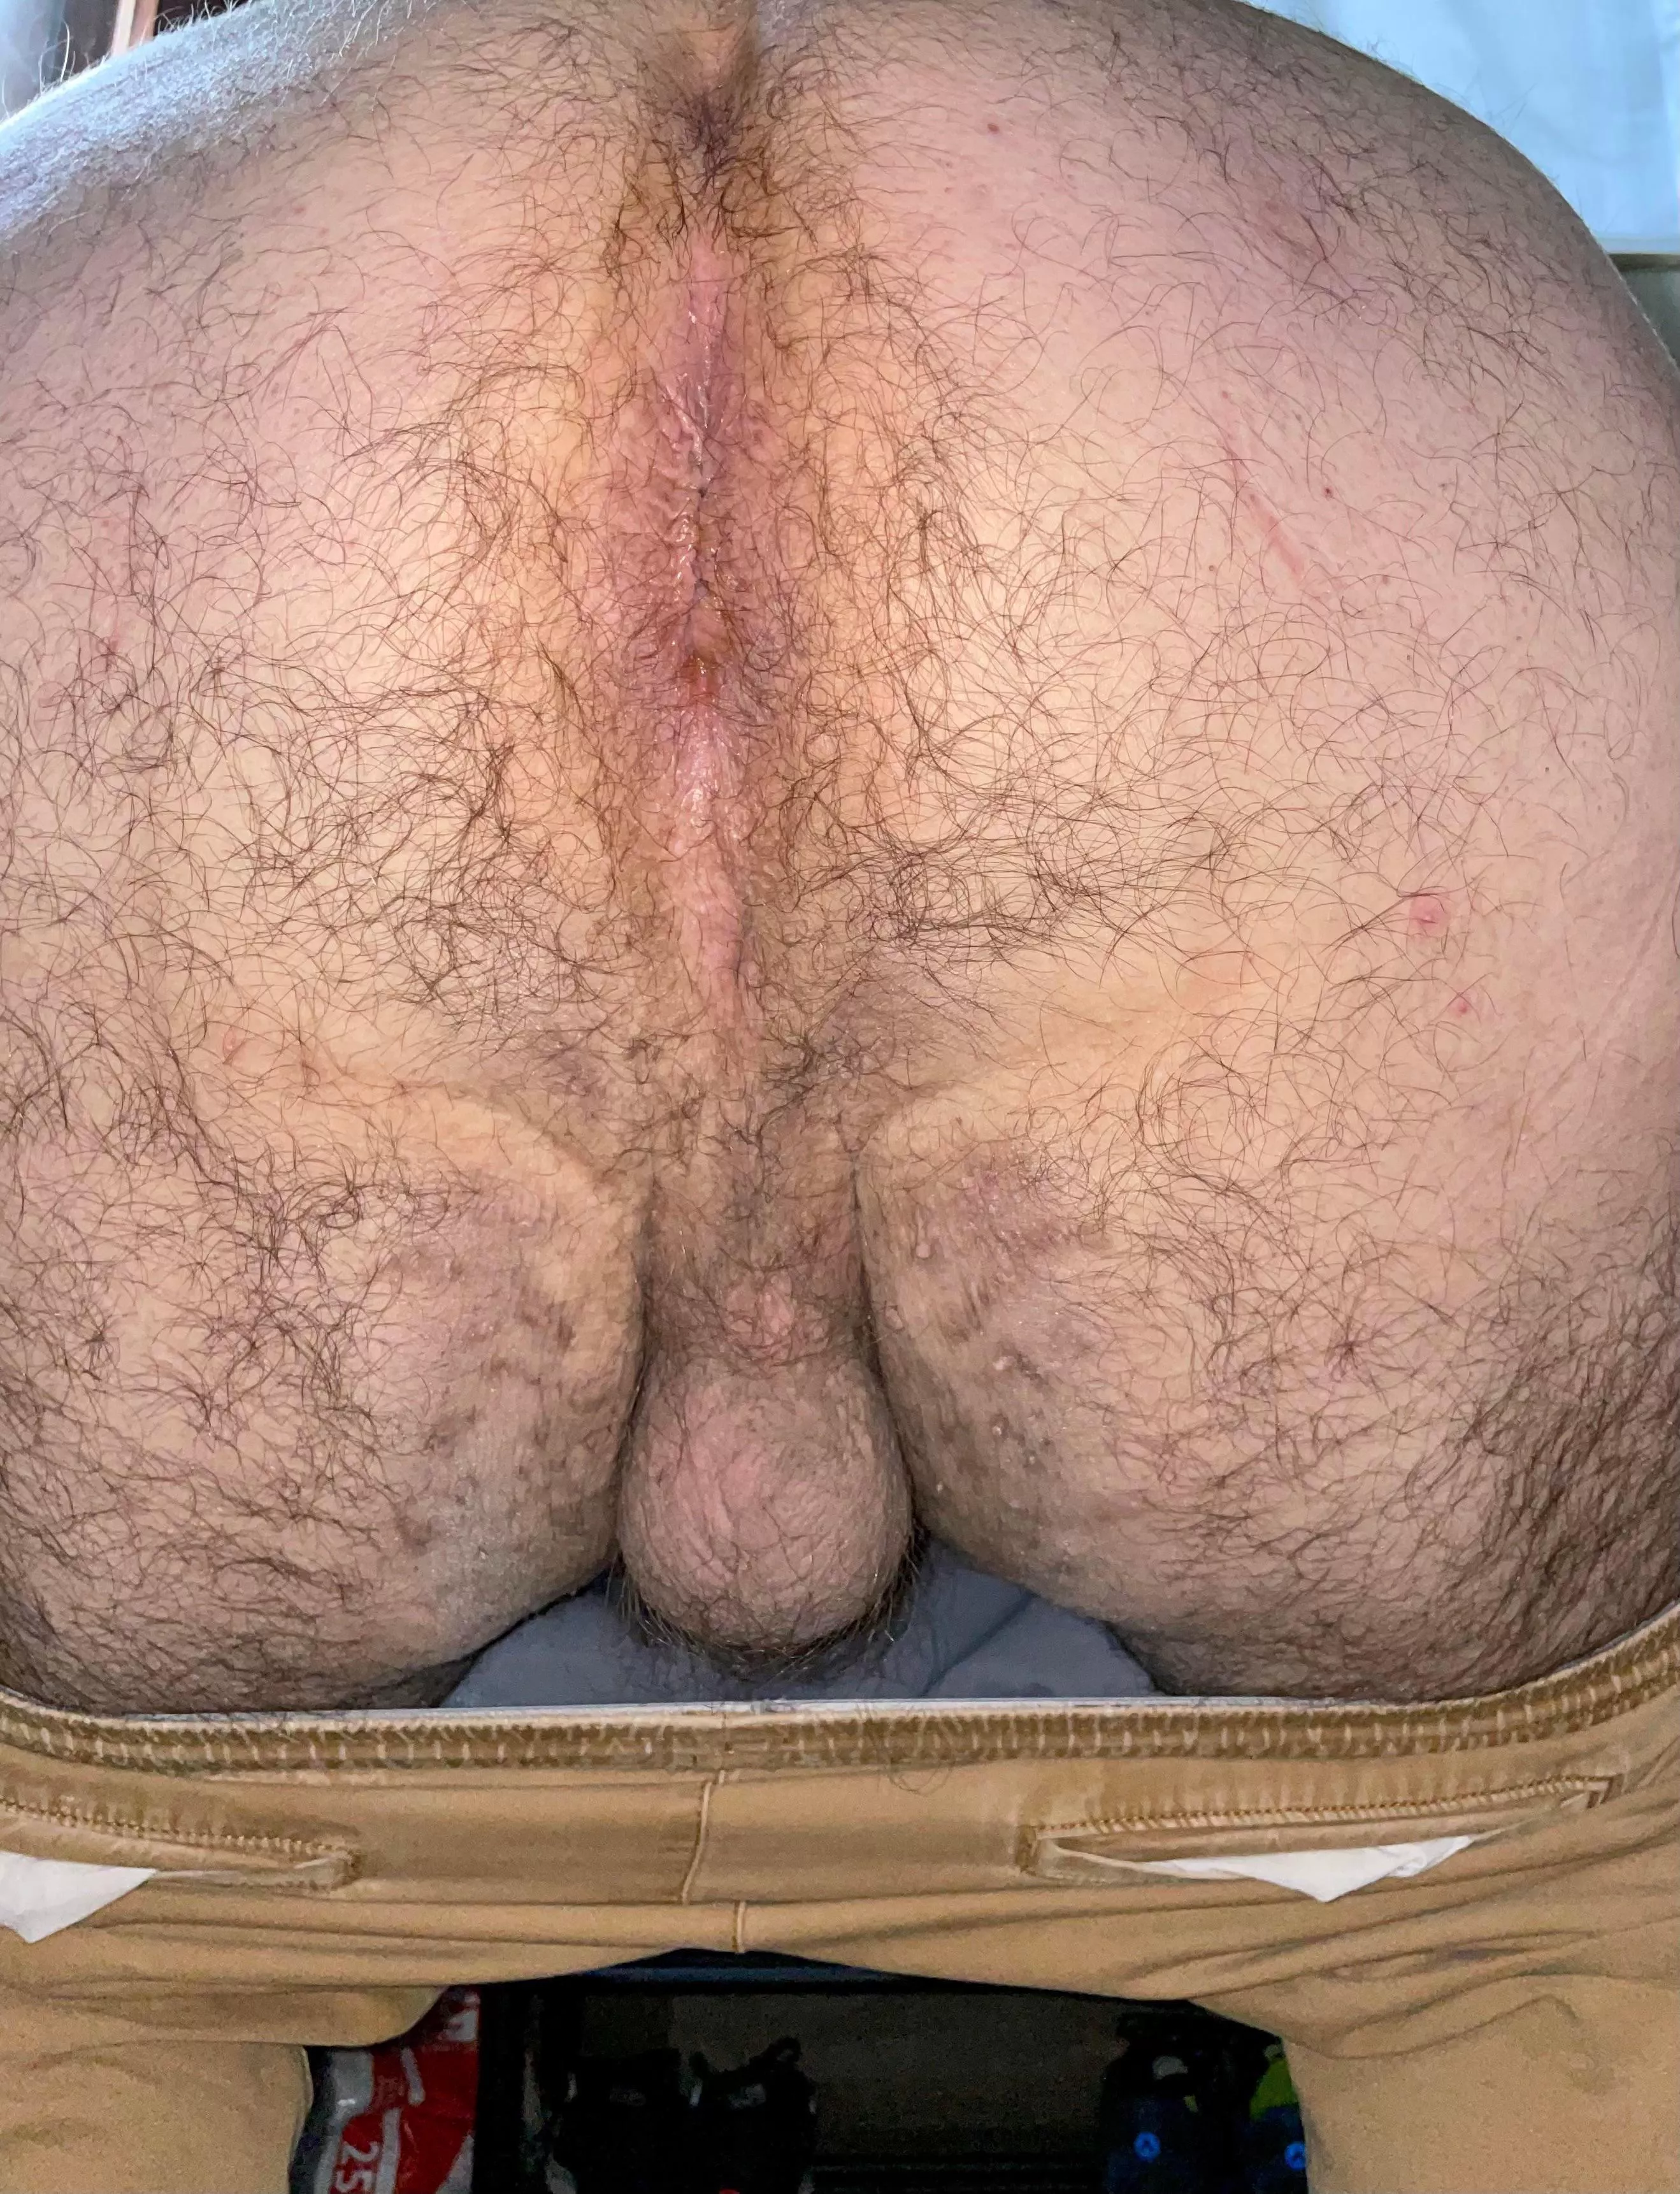 Plump Hairy Anal - Chubby Hairy Asshole | Niche Top Mature